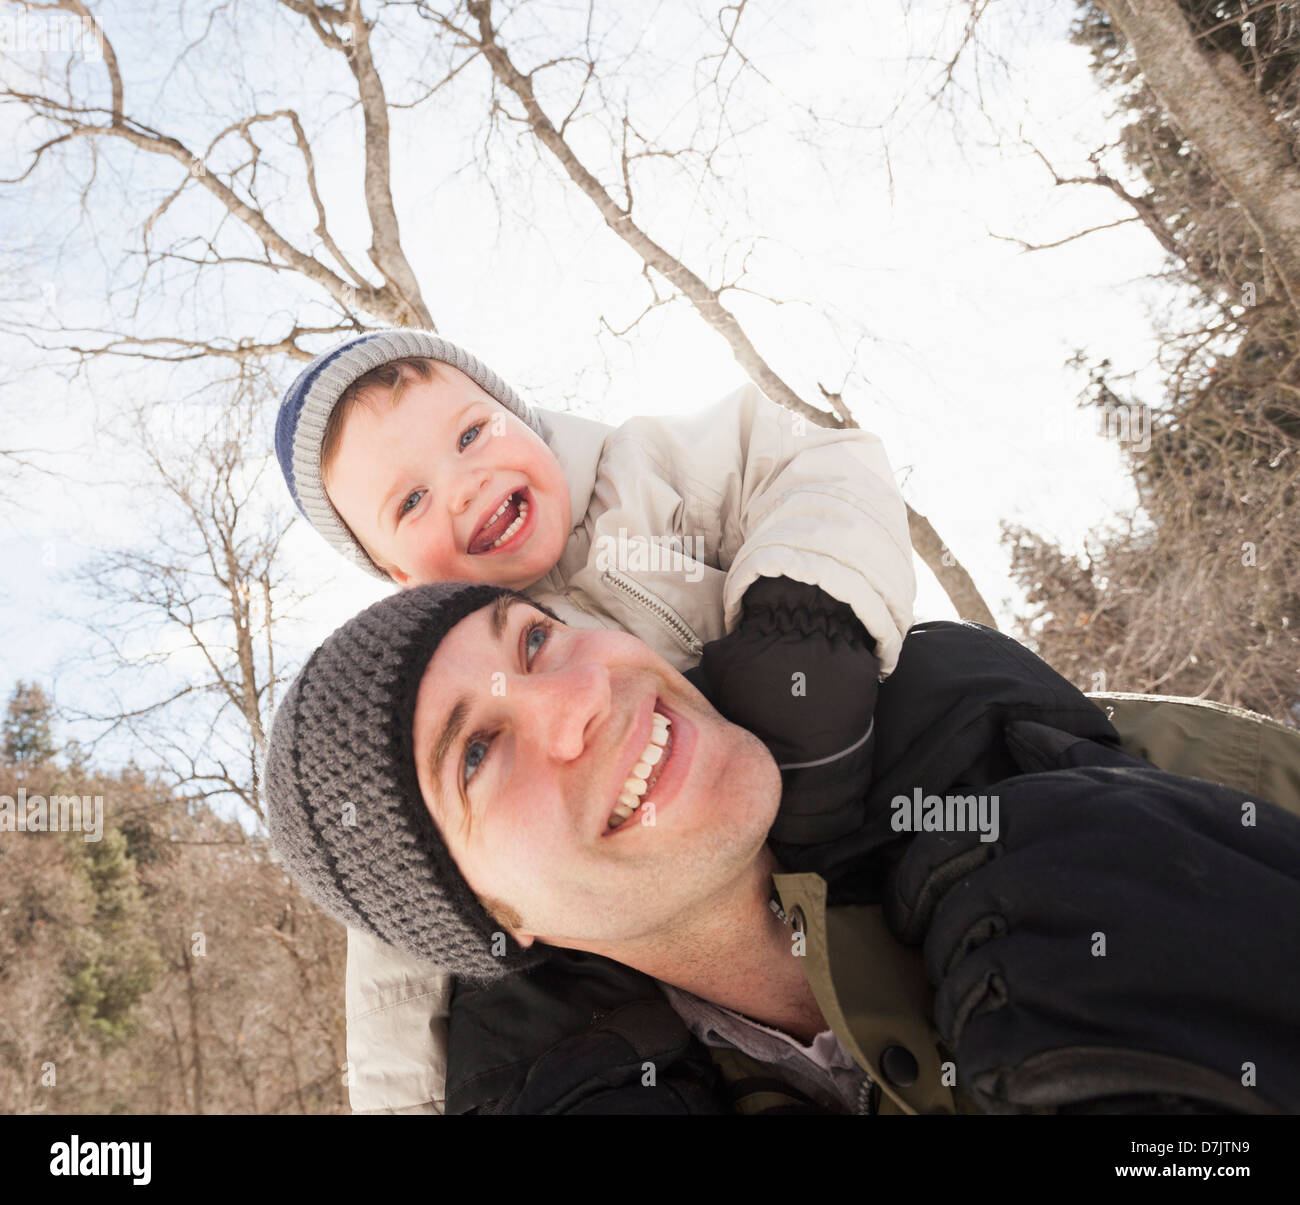 USA, Utah, Highland, Young man carrying his son (12-17 months) on shoulders Stock Photo